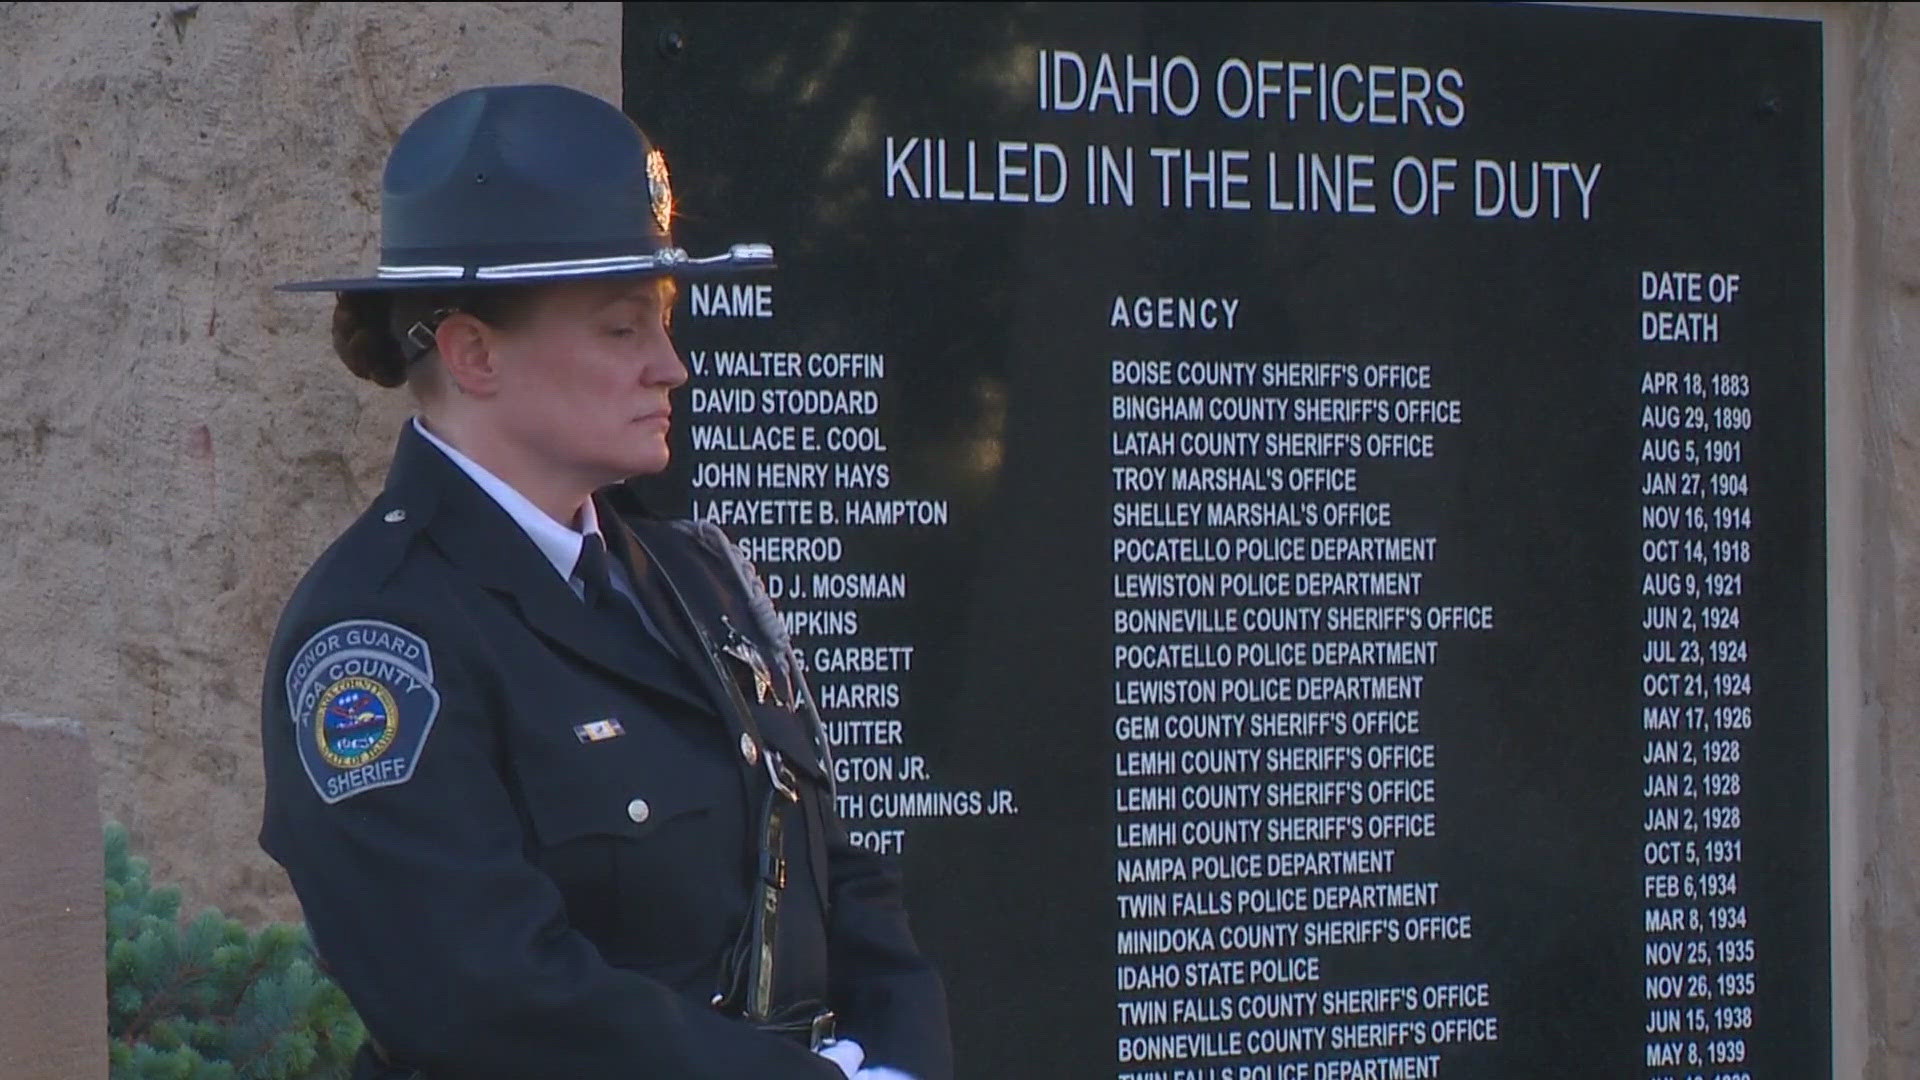 Another memorial ceremony will be held on Thursday at 10 a.m. at Meridan's Idaho Peace Officers' Memorial.